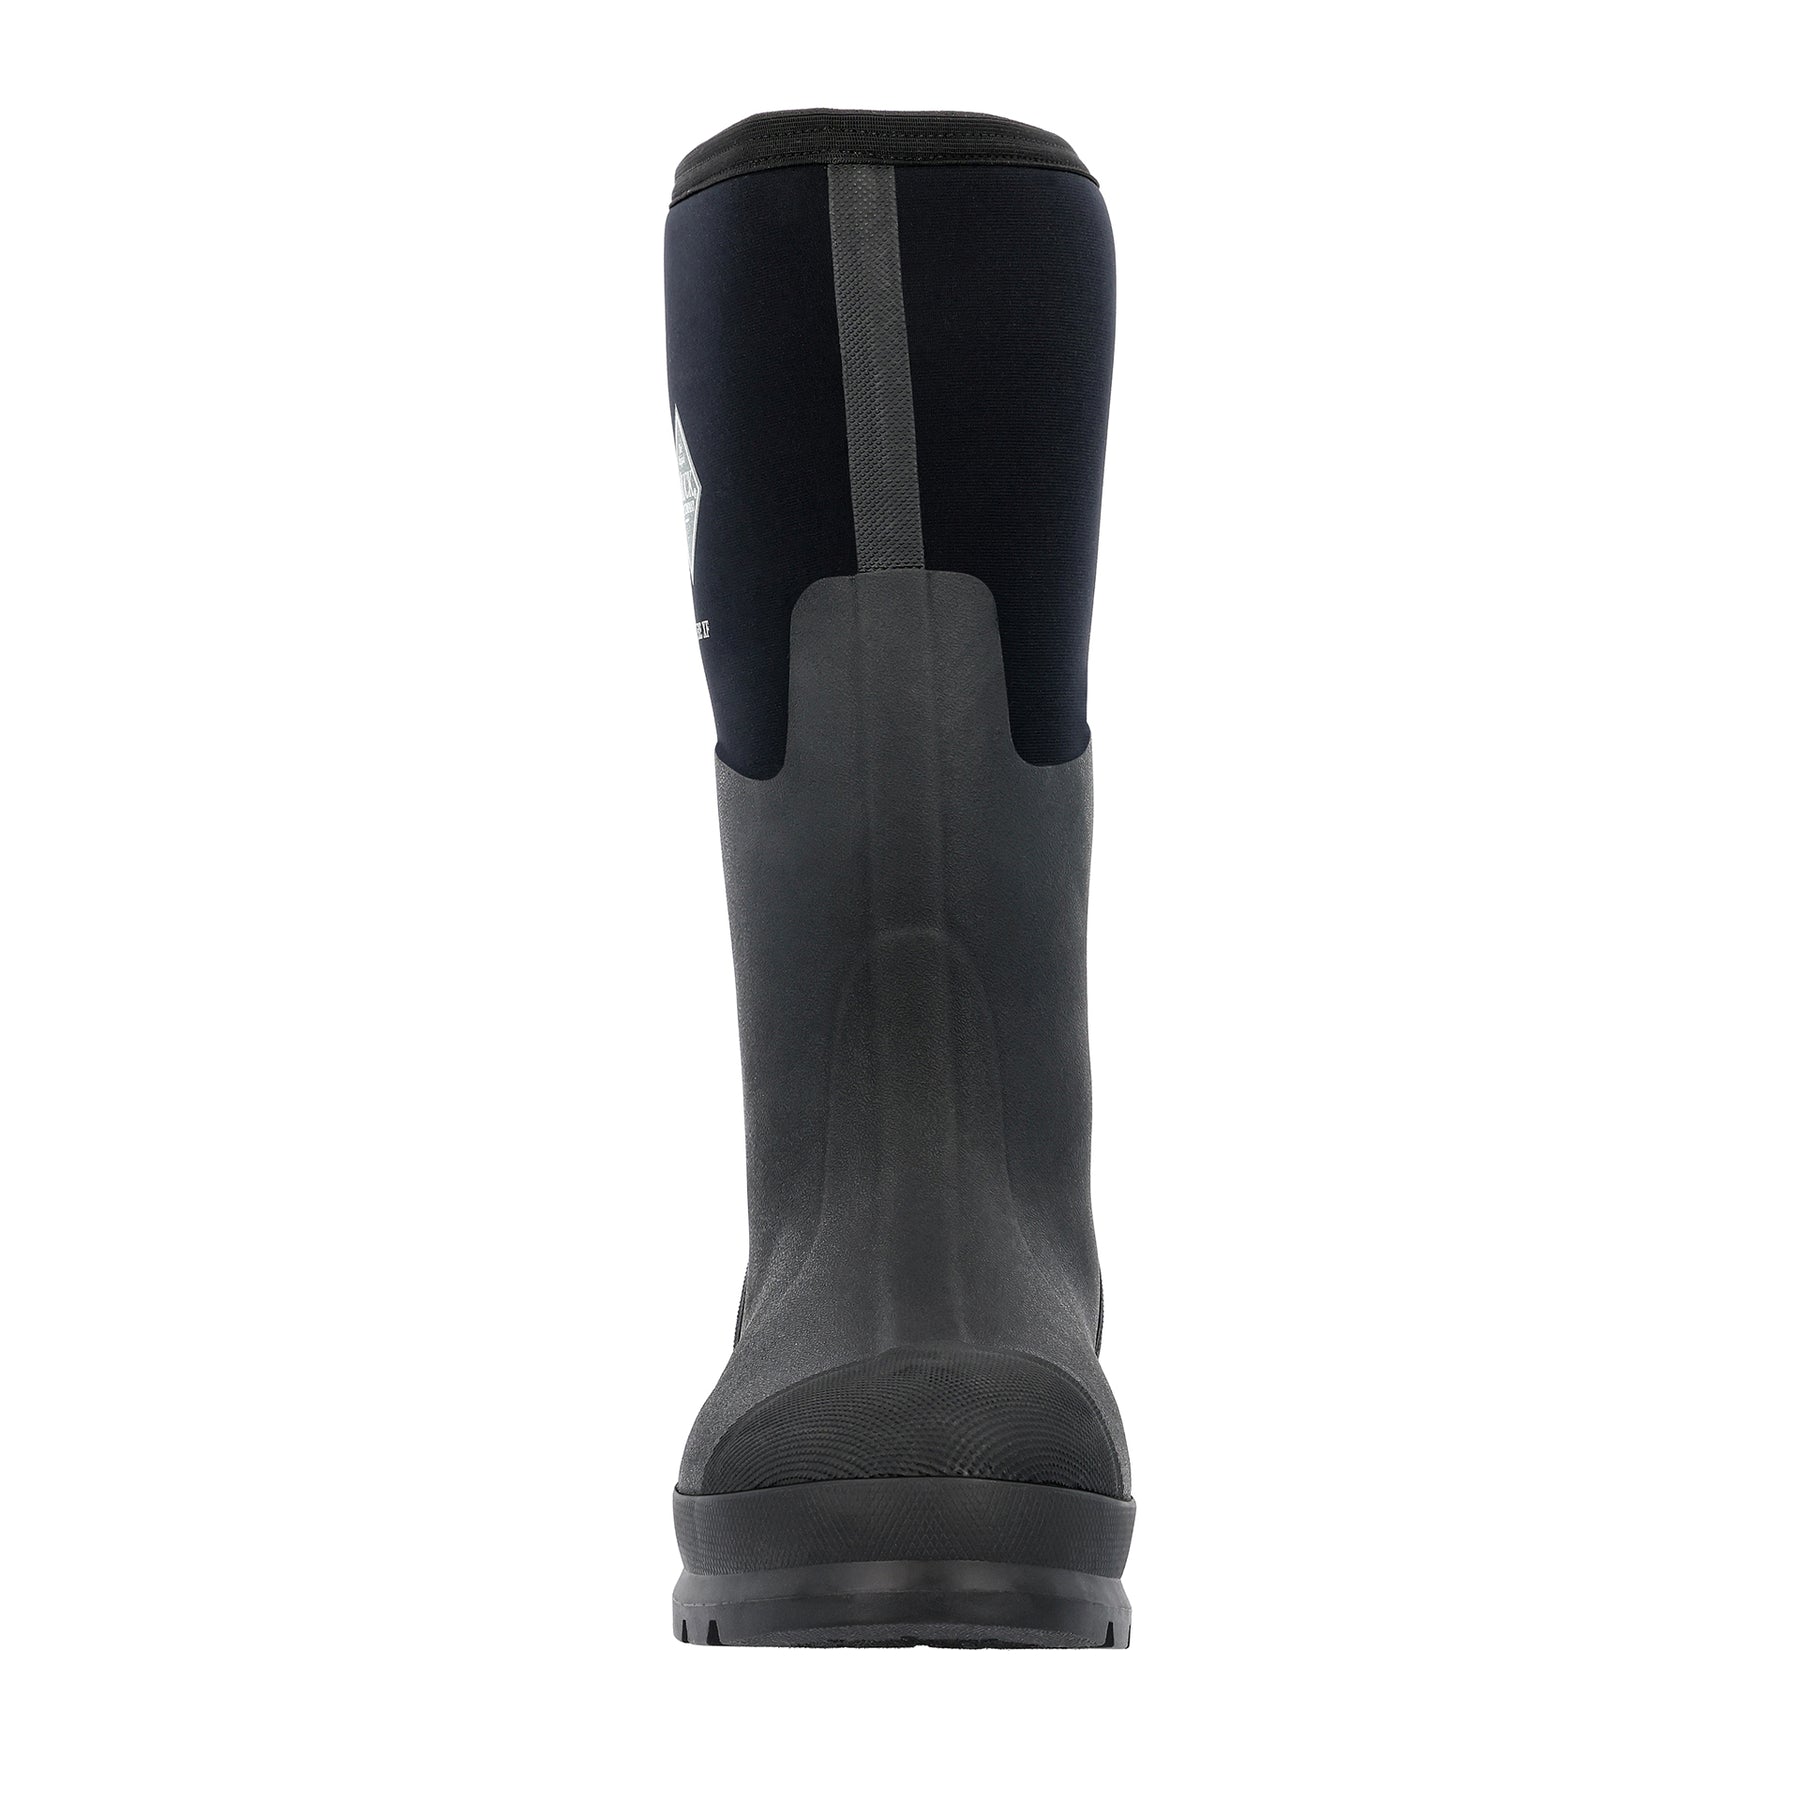 Muck Boots Chore Adjustable Tall Boots Black